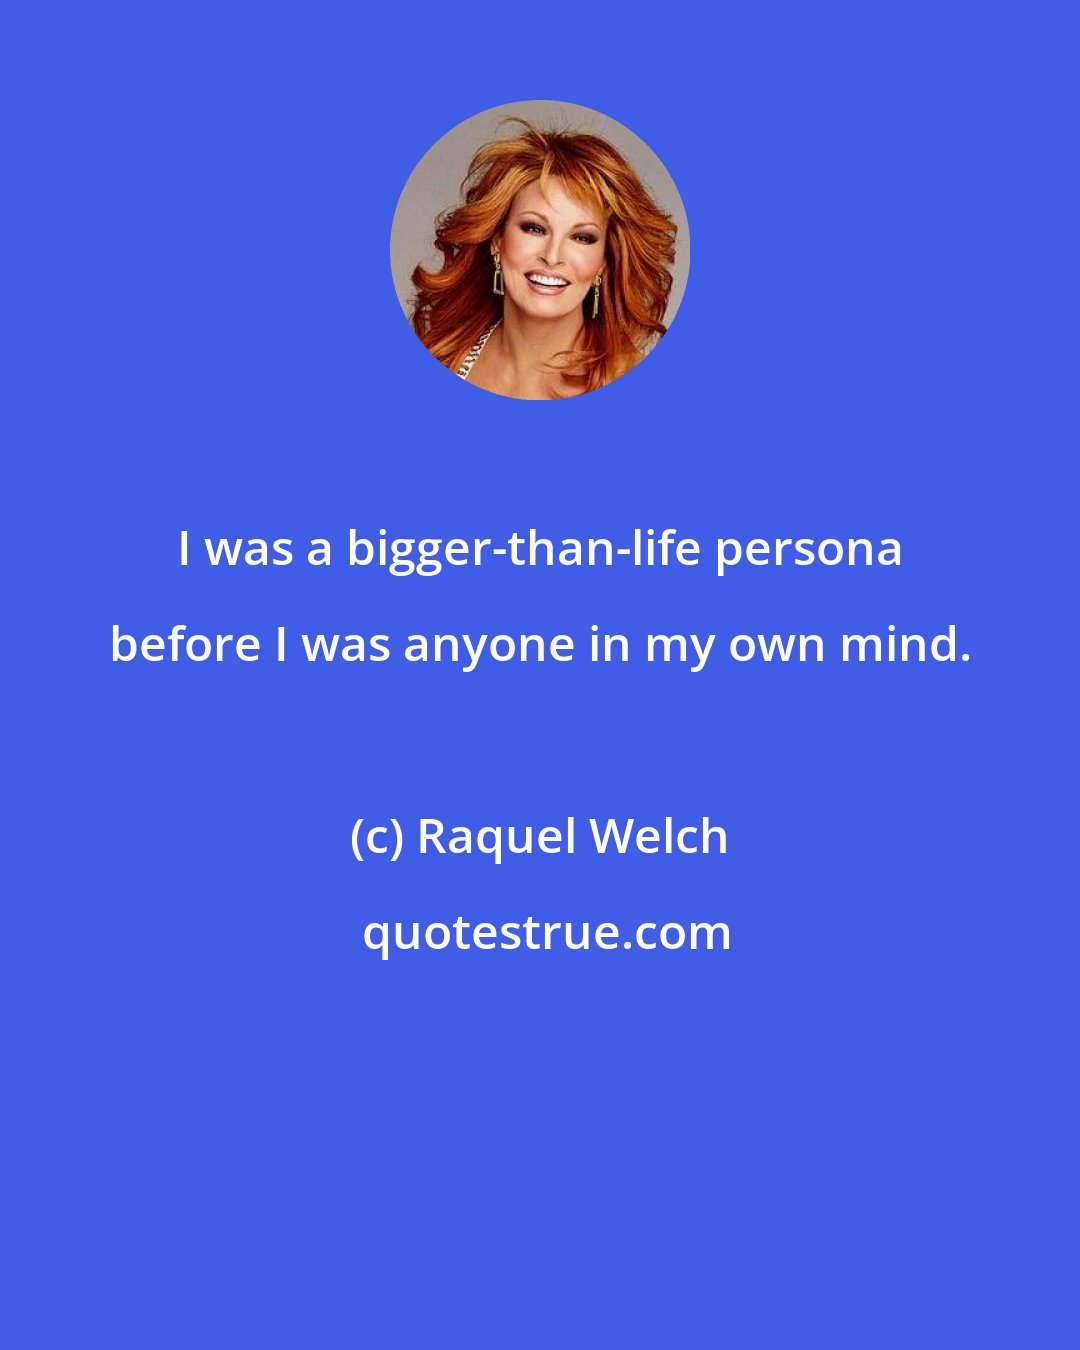 Raquel Welch: I was a bigger-than-life persona before I was anyone in my own mind.